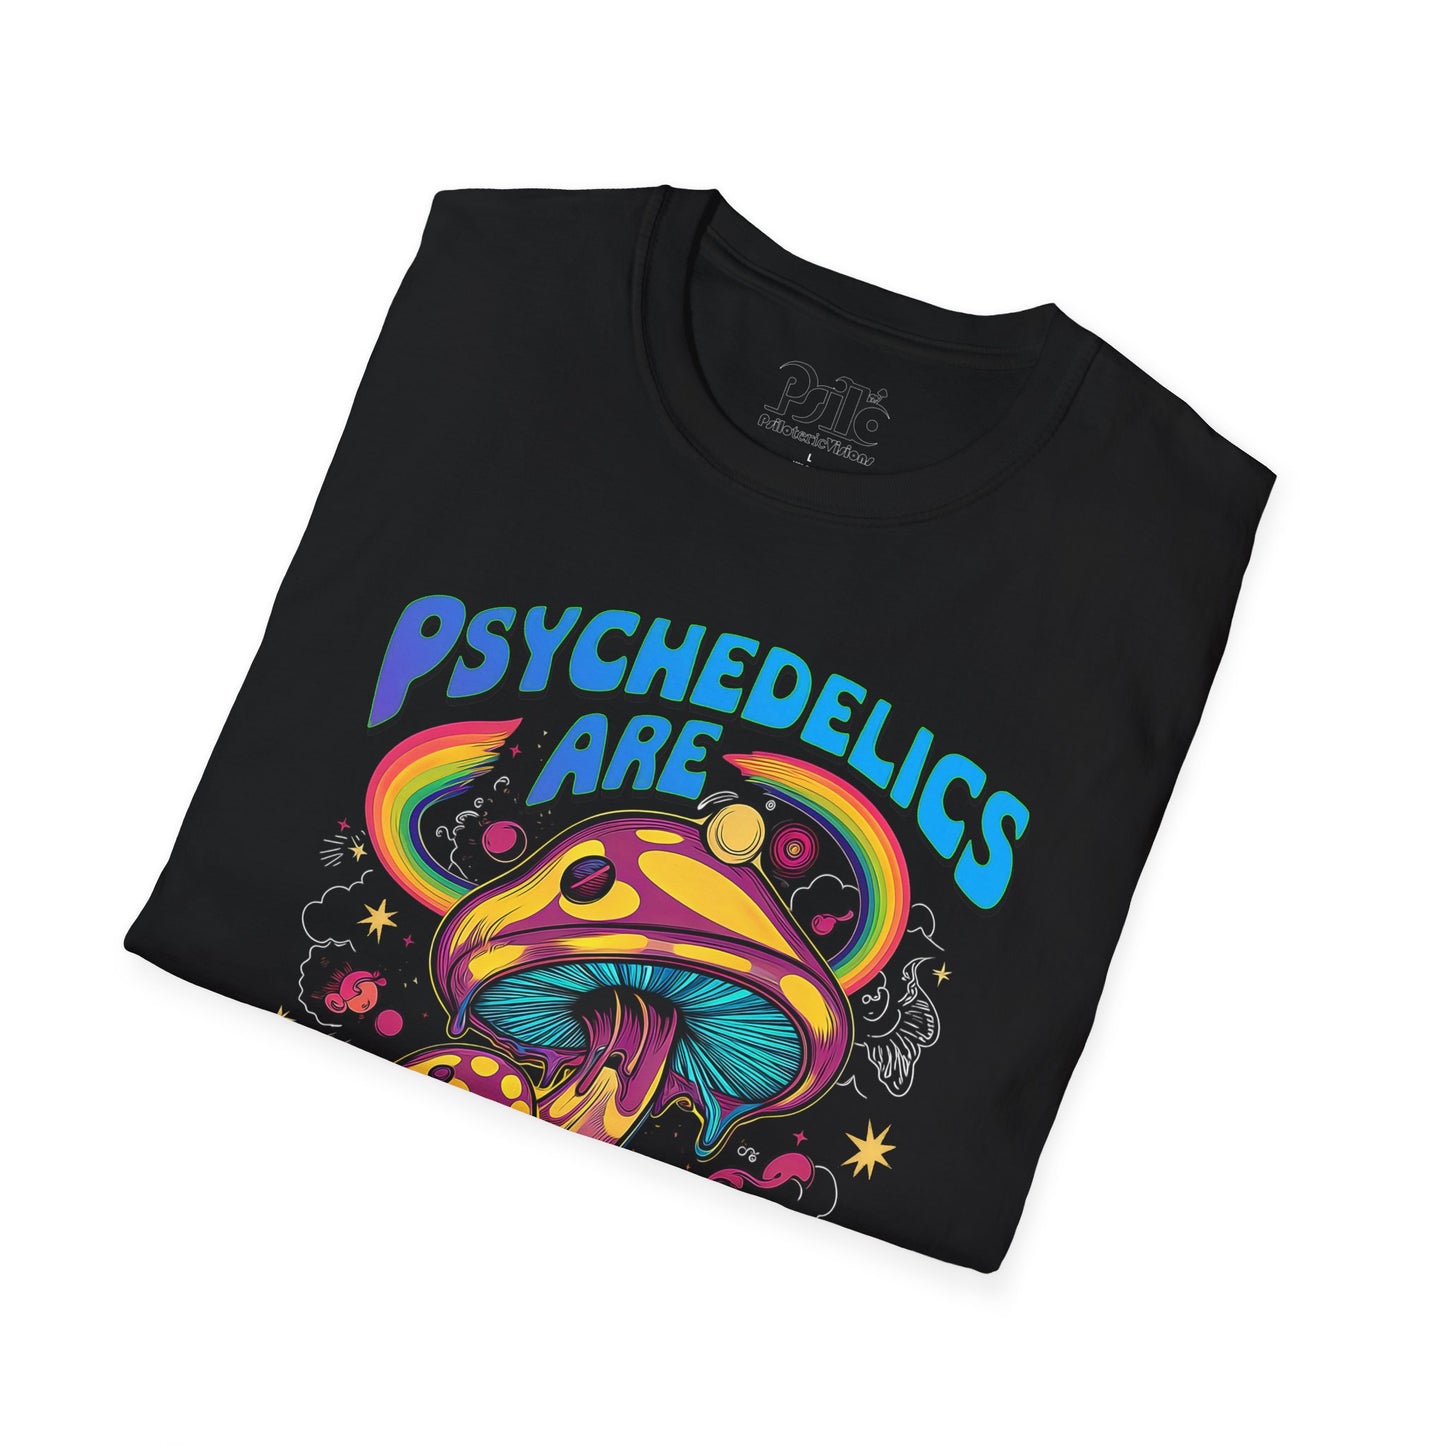 "Psychedelics Are Awesome" Unisex T-SHIRT